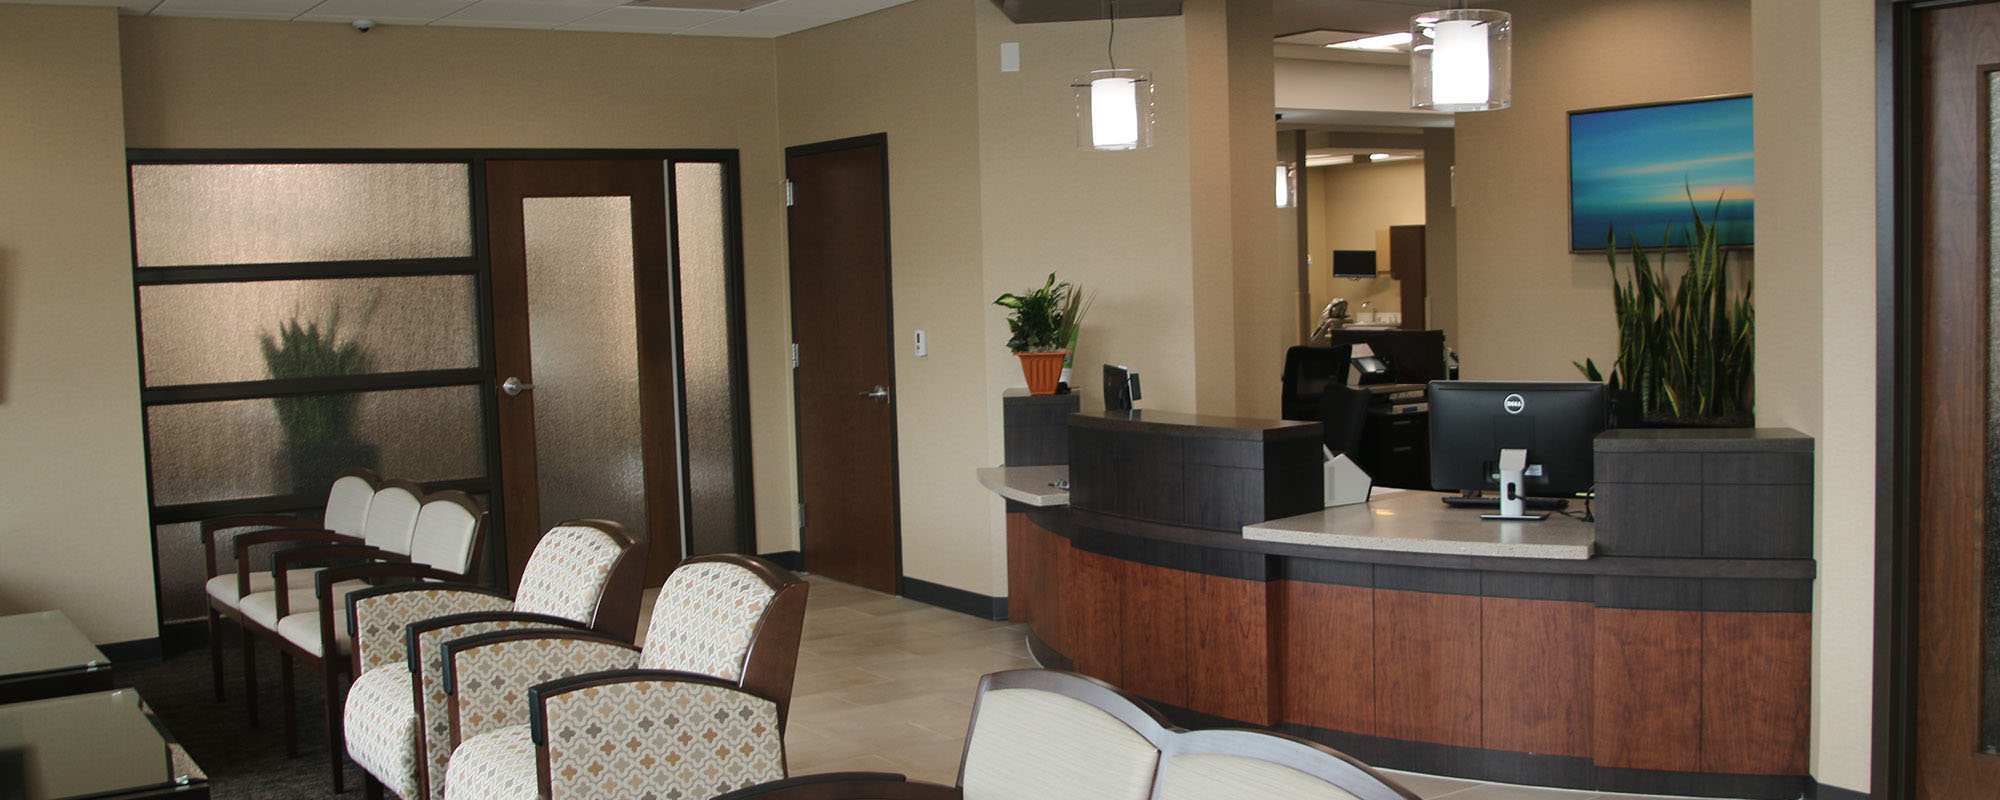 Dental Associates Alsip provides complete family dentistry from a state-of-the-art clinic